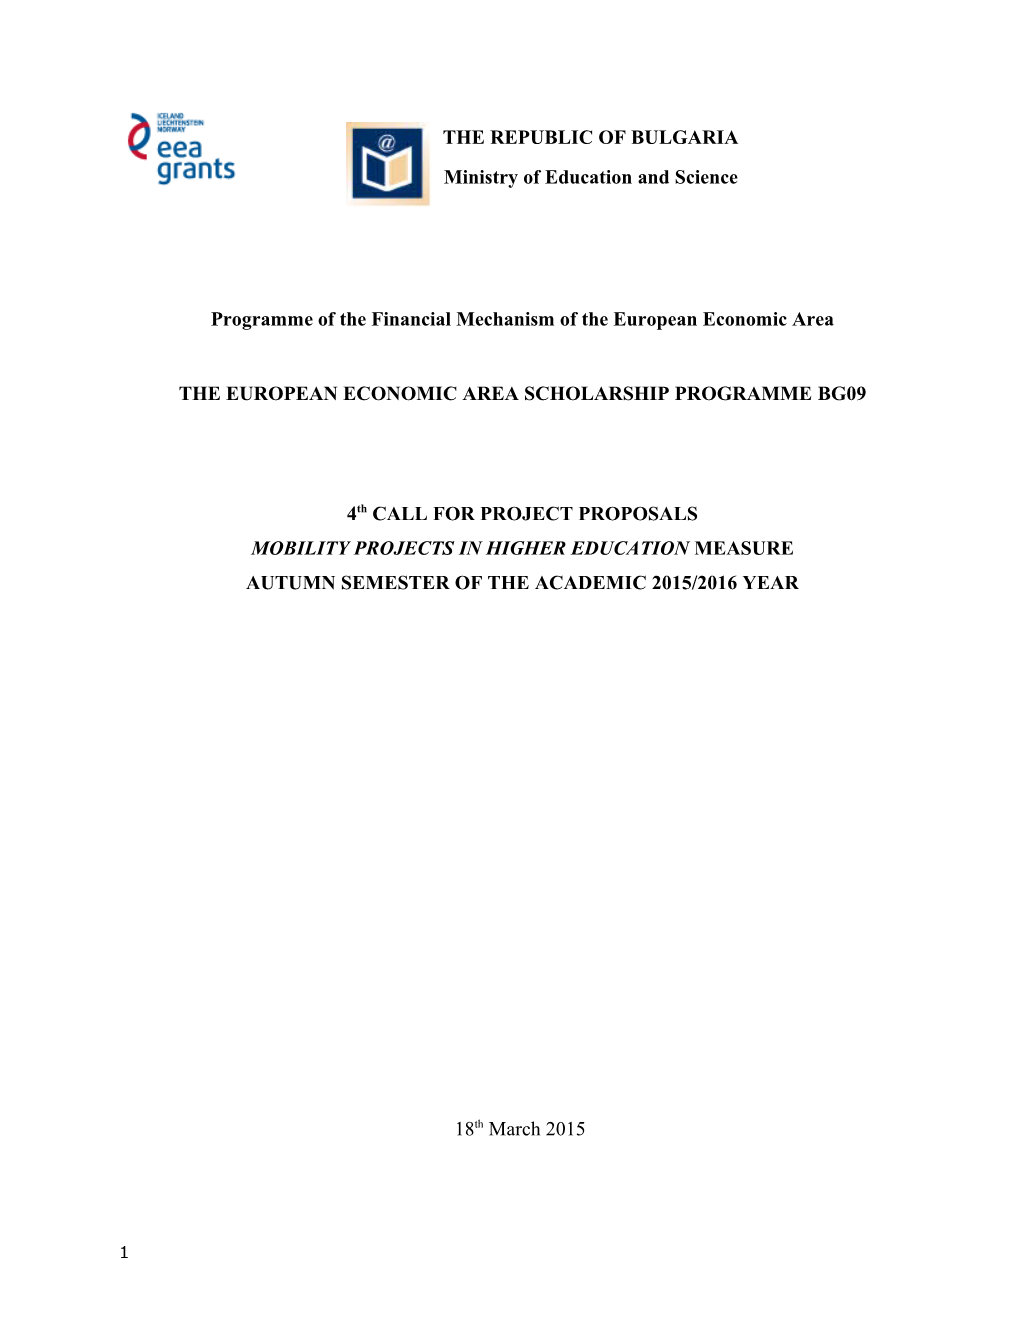 Programme of the Financial Mechanism of the European Economic Area